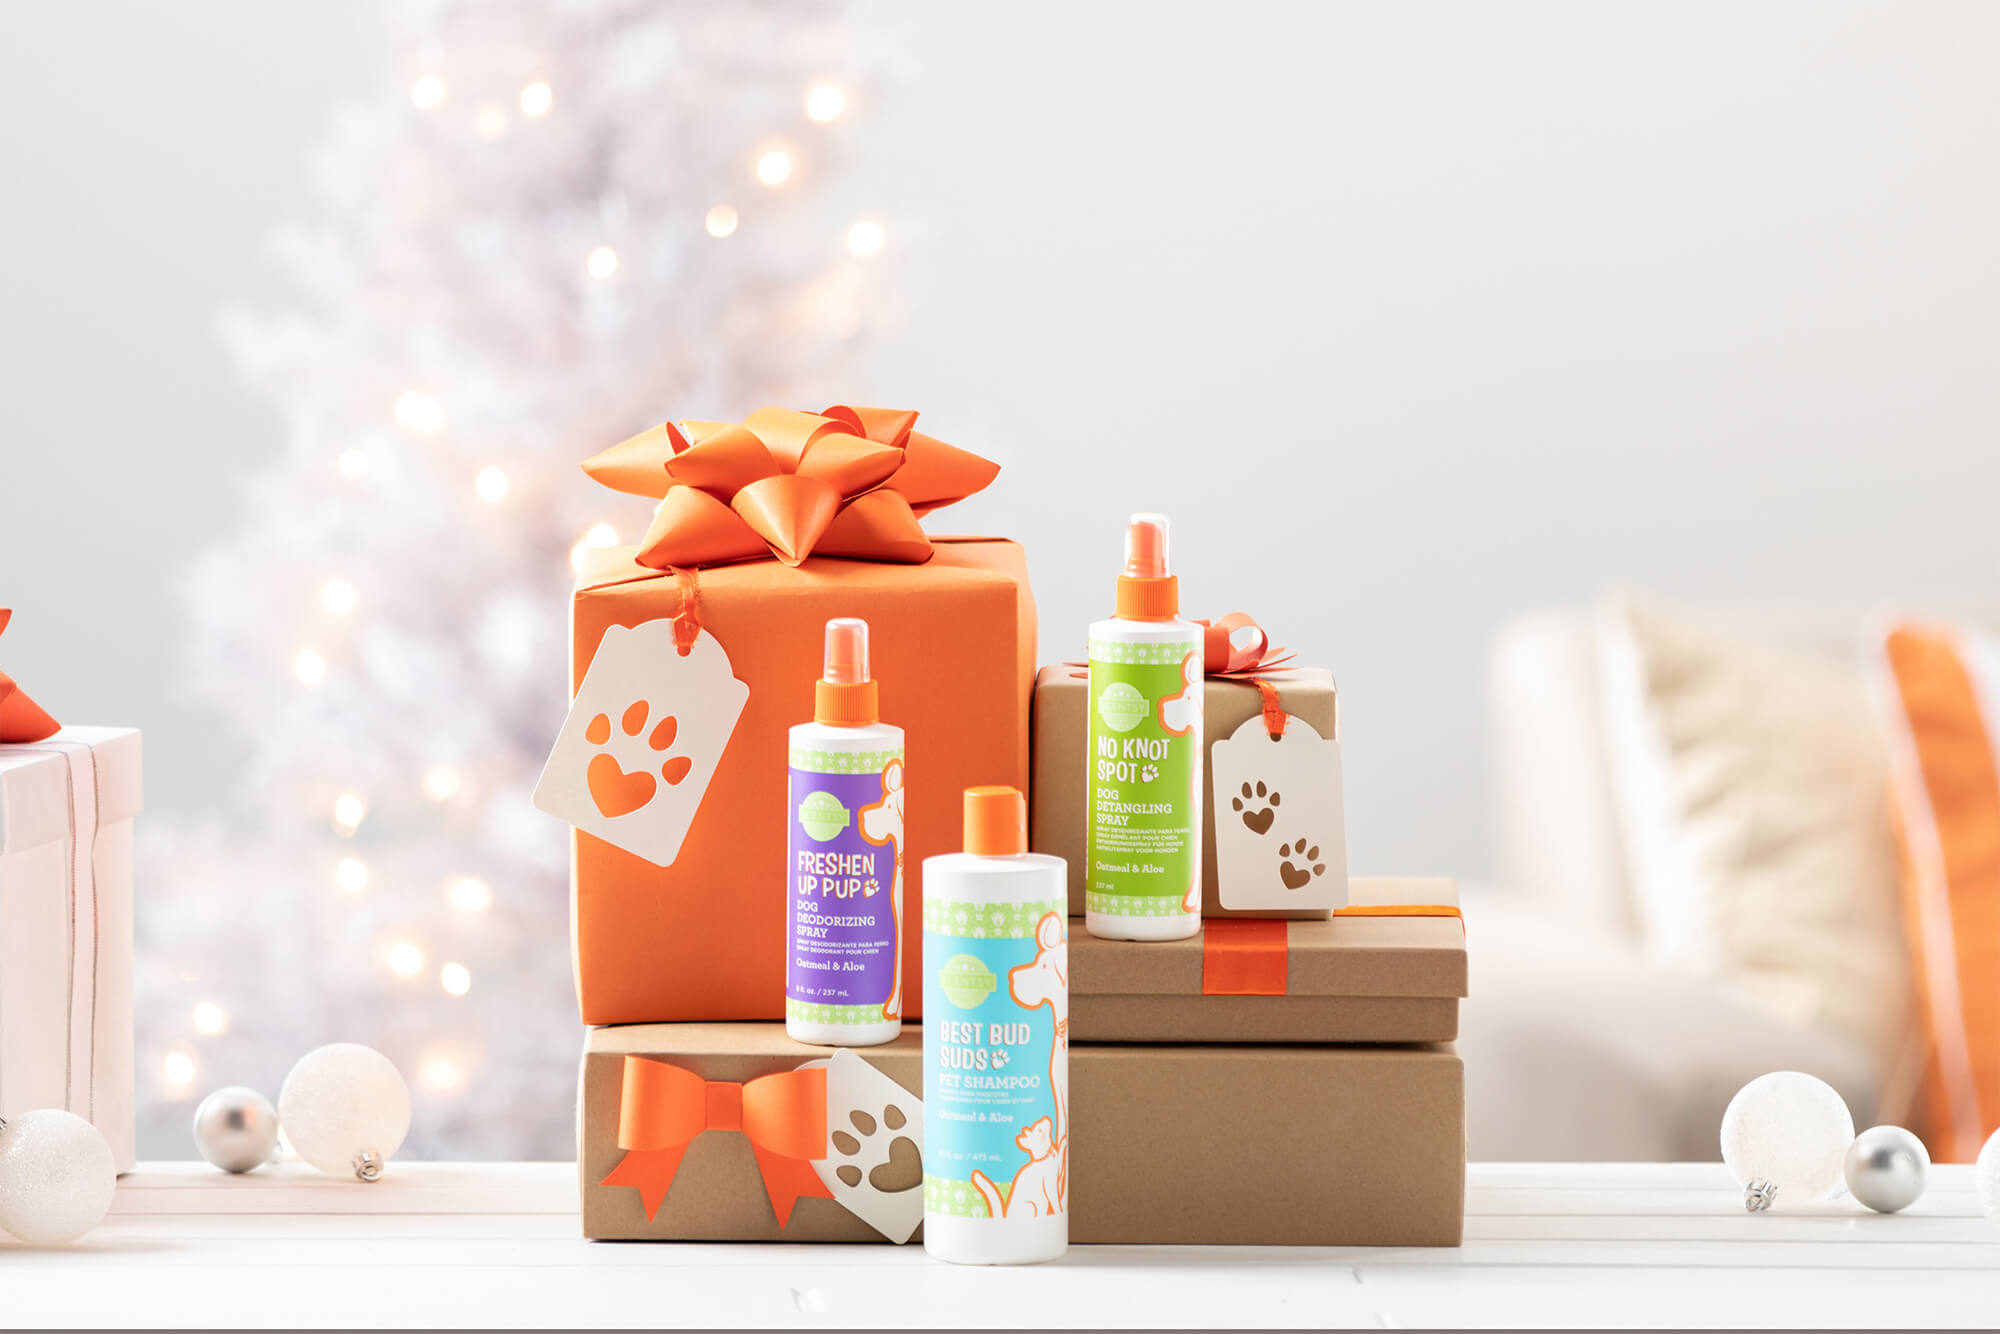 11/26 blog feature image - presents with the Scentsy Pets products stacked on them.